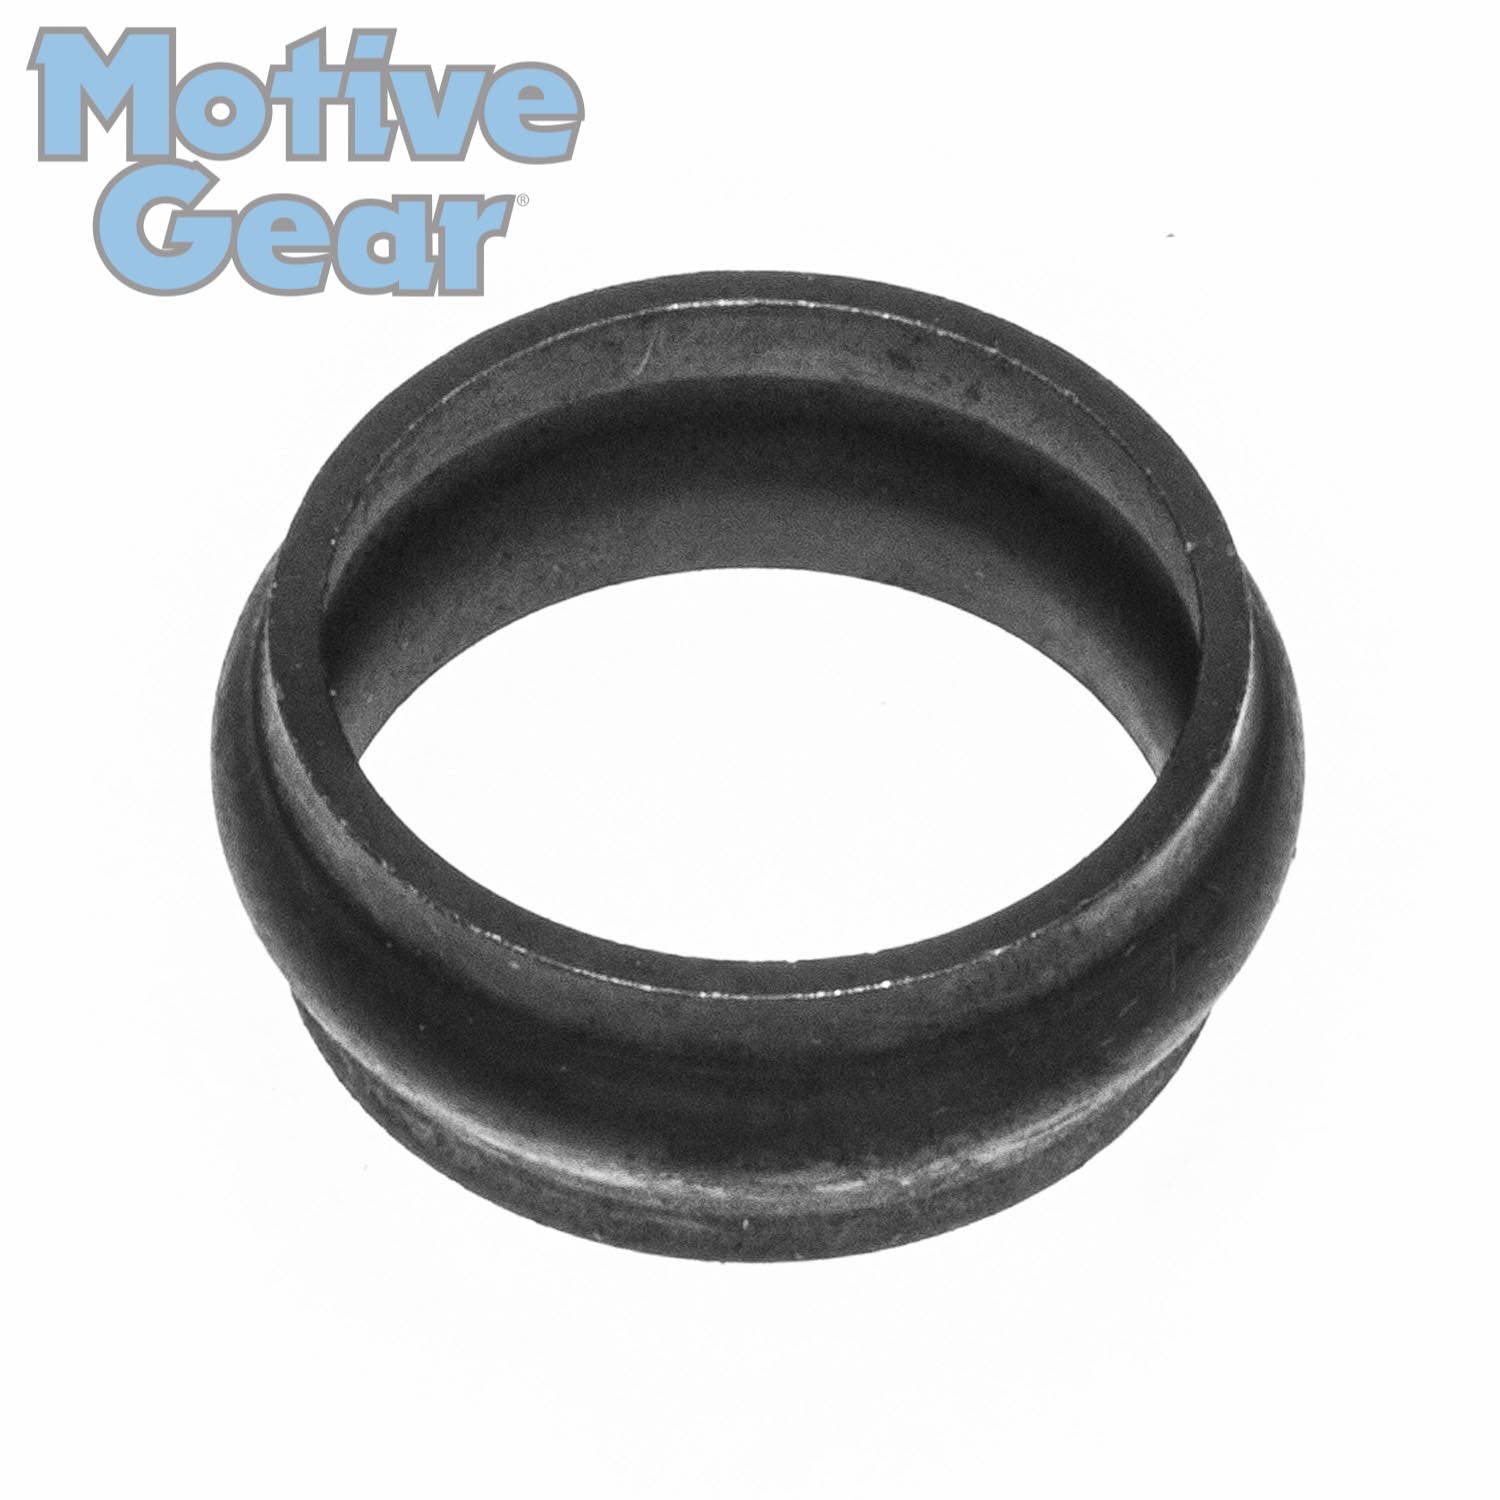 Motive Gear 3507678 Differential Crush Sleeve